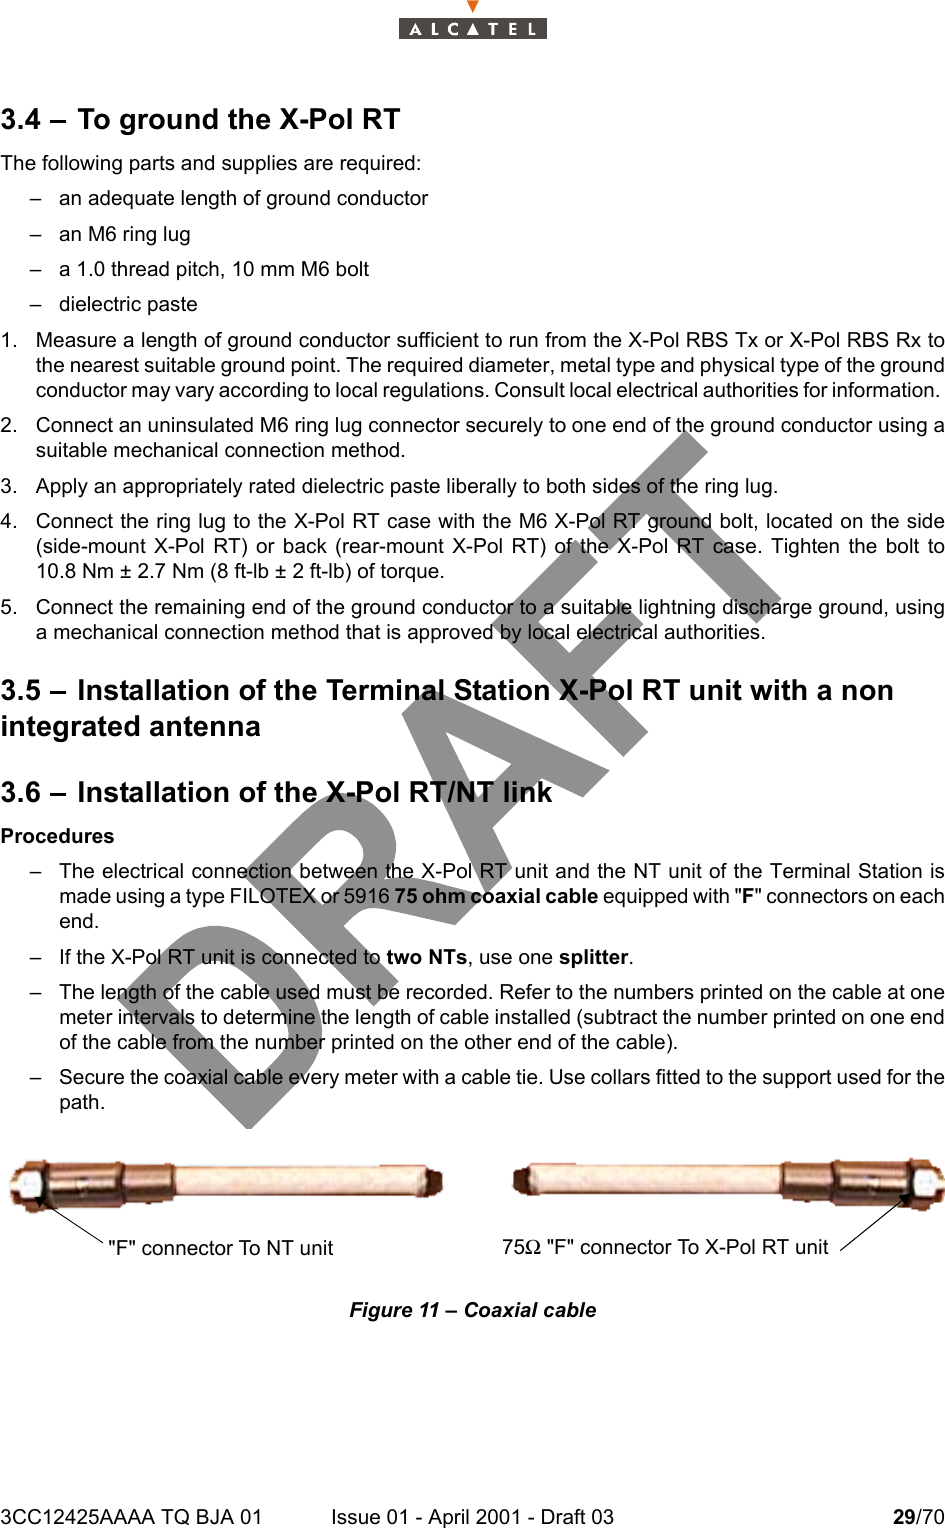 3CC12425AAAA TQ BJA 01 Issue 01 - April 2001 - Draft 03 29/70343.4 – To ground the X-Pol RTThe following parts and supplies are required:– an adequate length of ground conductor– an M6 ring lug– a 1.0 thread pitch, 10 mm M6 bolt– dielectric paste1. Measure a length of ground conductor sufficient to run from the X-Pol RBS Tx or X-Pol RBS Rx tothe nearest suitable ground point. The required diameter, metal type and physical type of the groundconductor may vary according to local regulations. Consult local electrical authorities for information. 2. Connect an uninsulated M6 ring lug connector securely to one end of the ground conductor using asuitable mechanical connection method.3. Apply an appropriately rated dielectric paste liberally to both sides of the ring lug.4. Connect the ring lug to the X-Pol RT case with the M6 X-Pol RT ground bolt, located on the side(side-mount X-Pol RT) or back (rear-mount X-Pol RT) of the X-Pol RT case. Tighten the bolt to10.8 Nm ± 2.7 Nm (8 ft-lb ± 2 ft-lb) of torque. 5. Connect the remaining end of the ground conductor to a suitable lightning discharge ground, usinga mechanical connection method that is approved by local electrical authorities. 3.5 – Installation of the Terminal Station X-Pol RT unit with a non integrated antenna3.6 – Installation of the X-Pol RT/NT linkProcedures– The electrical connection between the X-Pol RT unit and the NT unit of the Terminal Station ismade using a type FILOTEX or 5916 75 ohm coaxial cable equipped with &quot;F&quot; connectors on eachend.– If the X-Pol RT unit is connected to two NTs, use one splitter.– The length of the cable used must be recorded. Refer to the numbers printed on the cable at onemeter intervals to determine the length of cable installed (subtract the number printed on one endof the cable from the number printed on the other end of the cable).– Secure the coaxial cable every meter with a cable tie. Use collars fitted to the support used for thepath.Figure 11 – Coaxial cable75Ω &quot;F&quot; connector To X-Pol RT unit&quot;F&quot; connector To NT unit